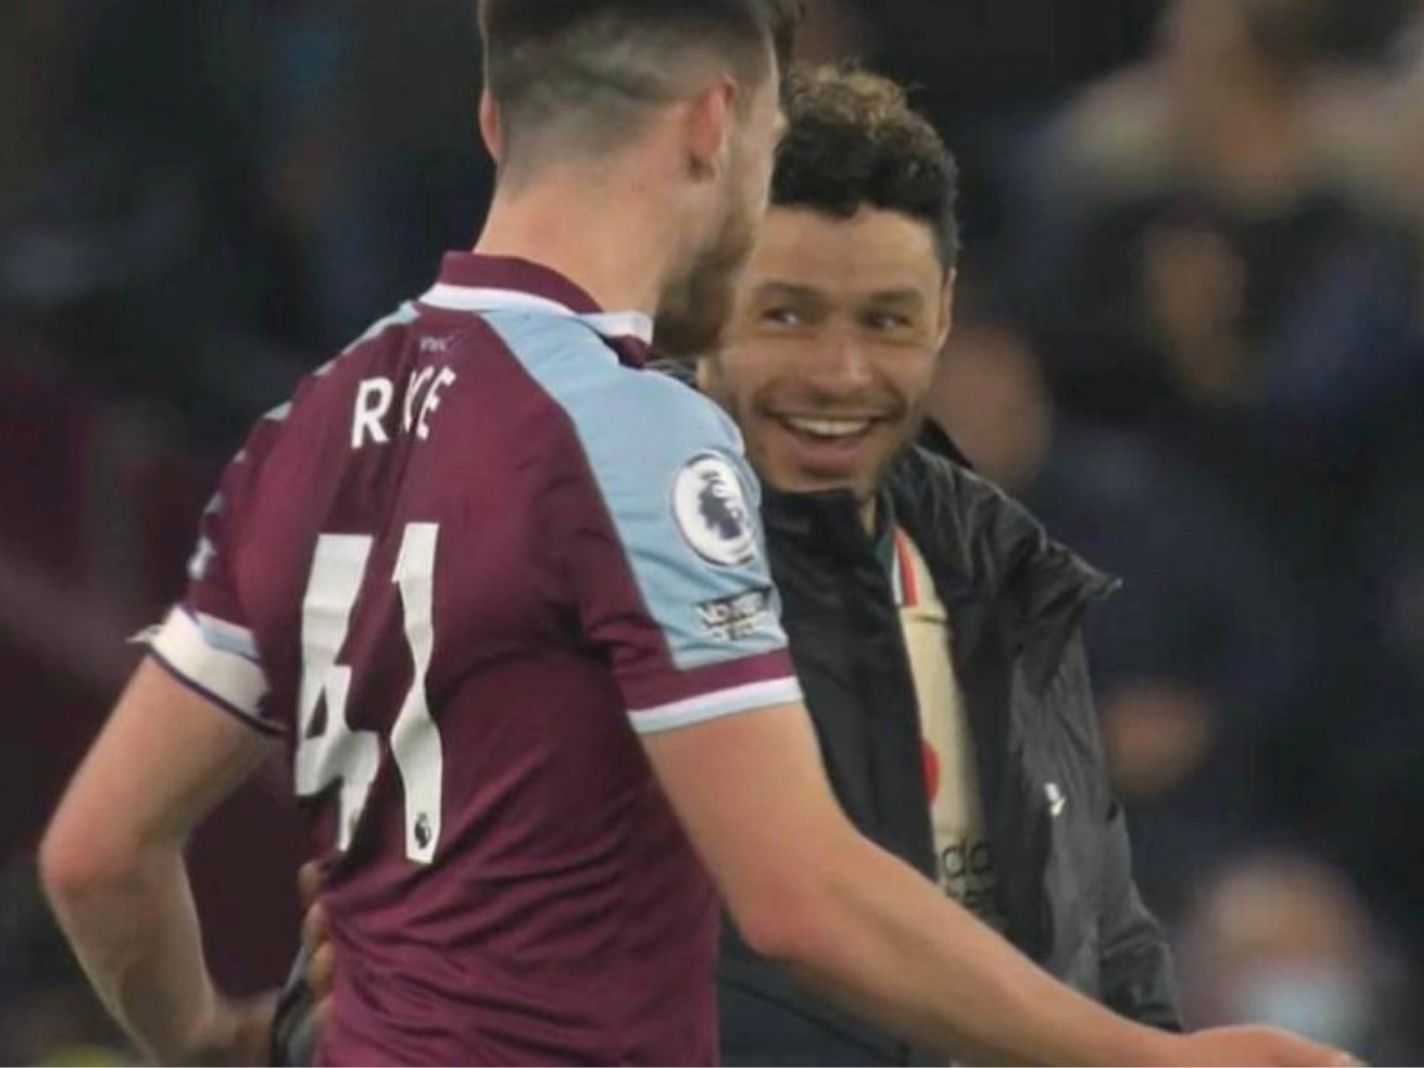 Liverpool fans’ fury as photo emerges of Ox joking with Declan Rice after West Ham defeat